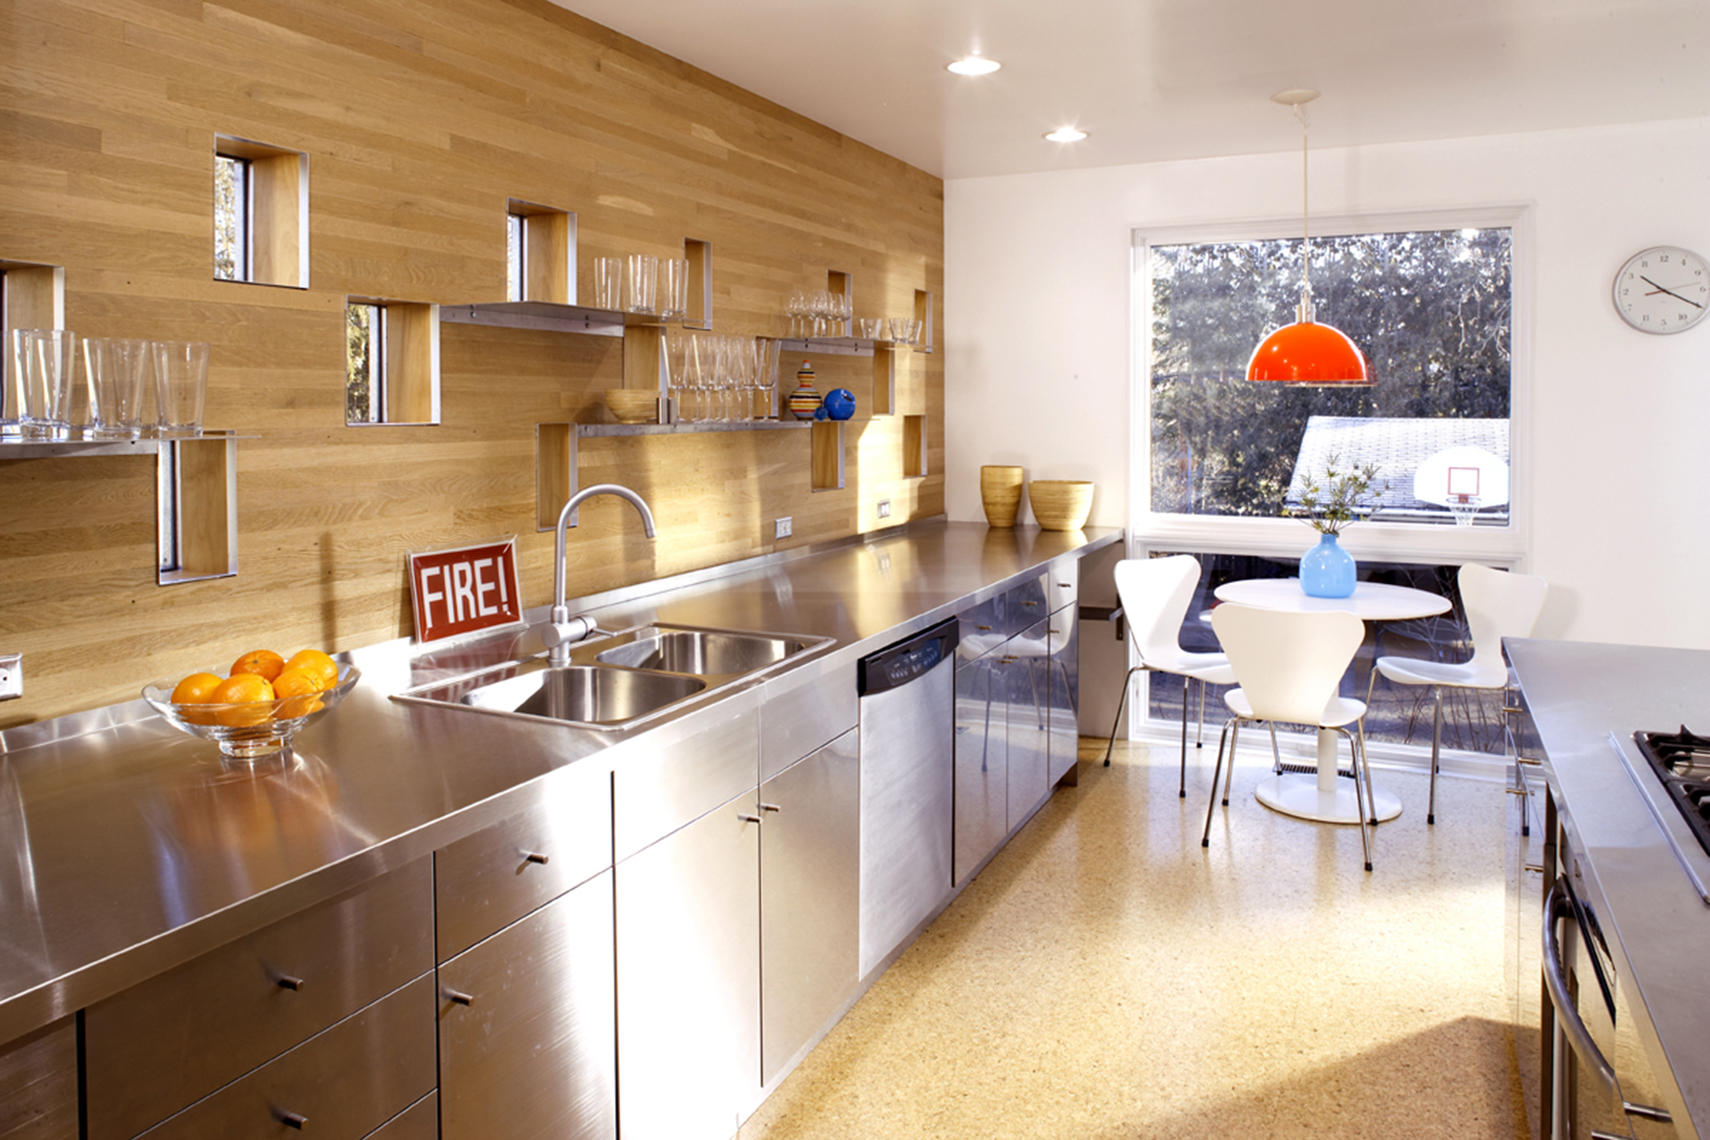 Modern kitchen with steel counter and wood backsplash